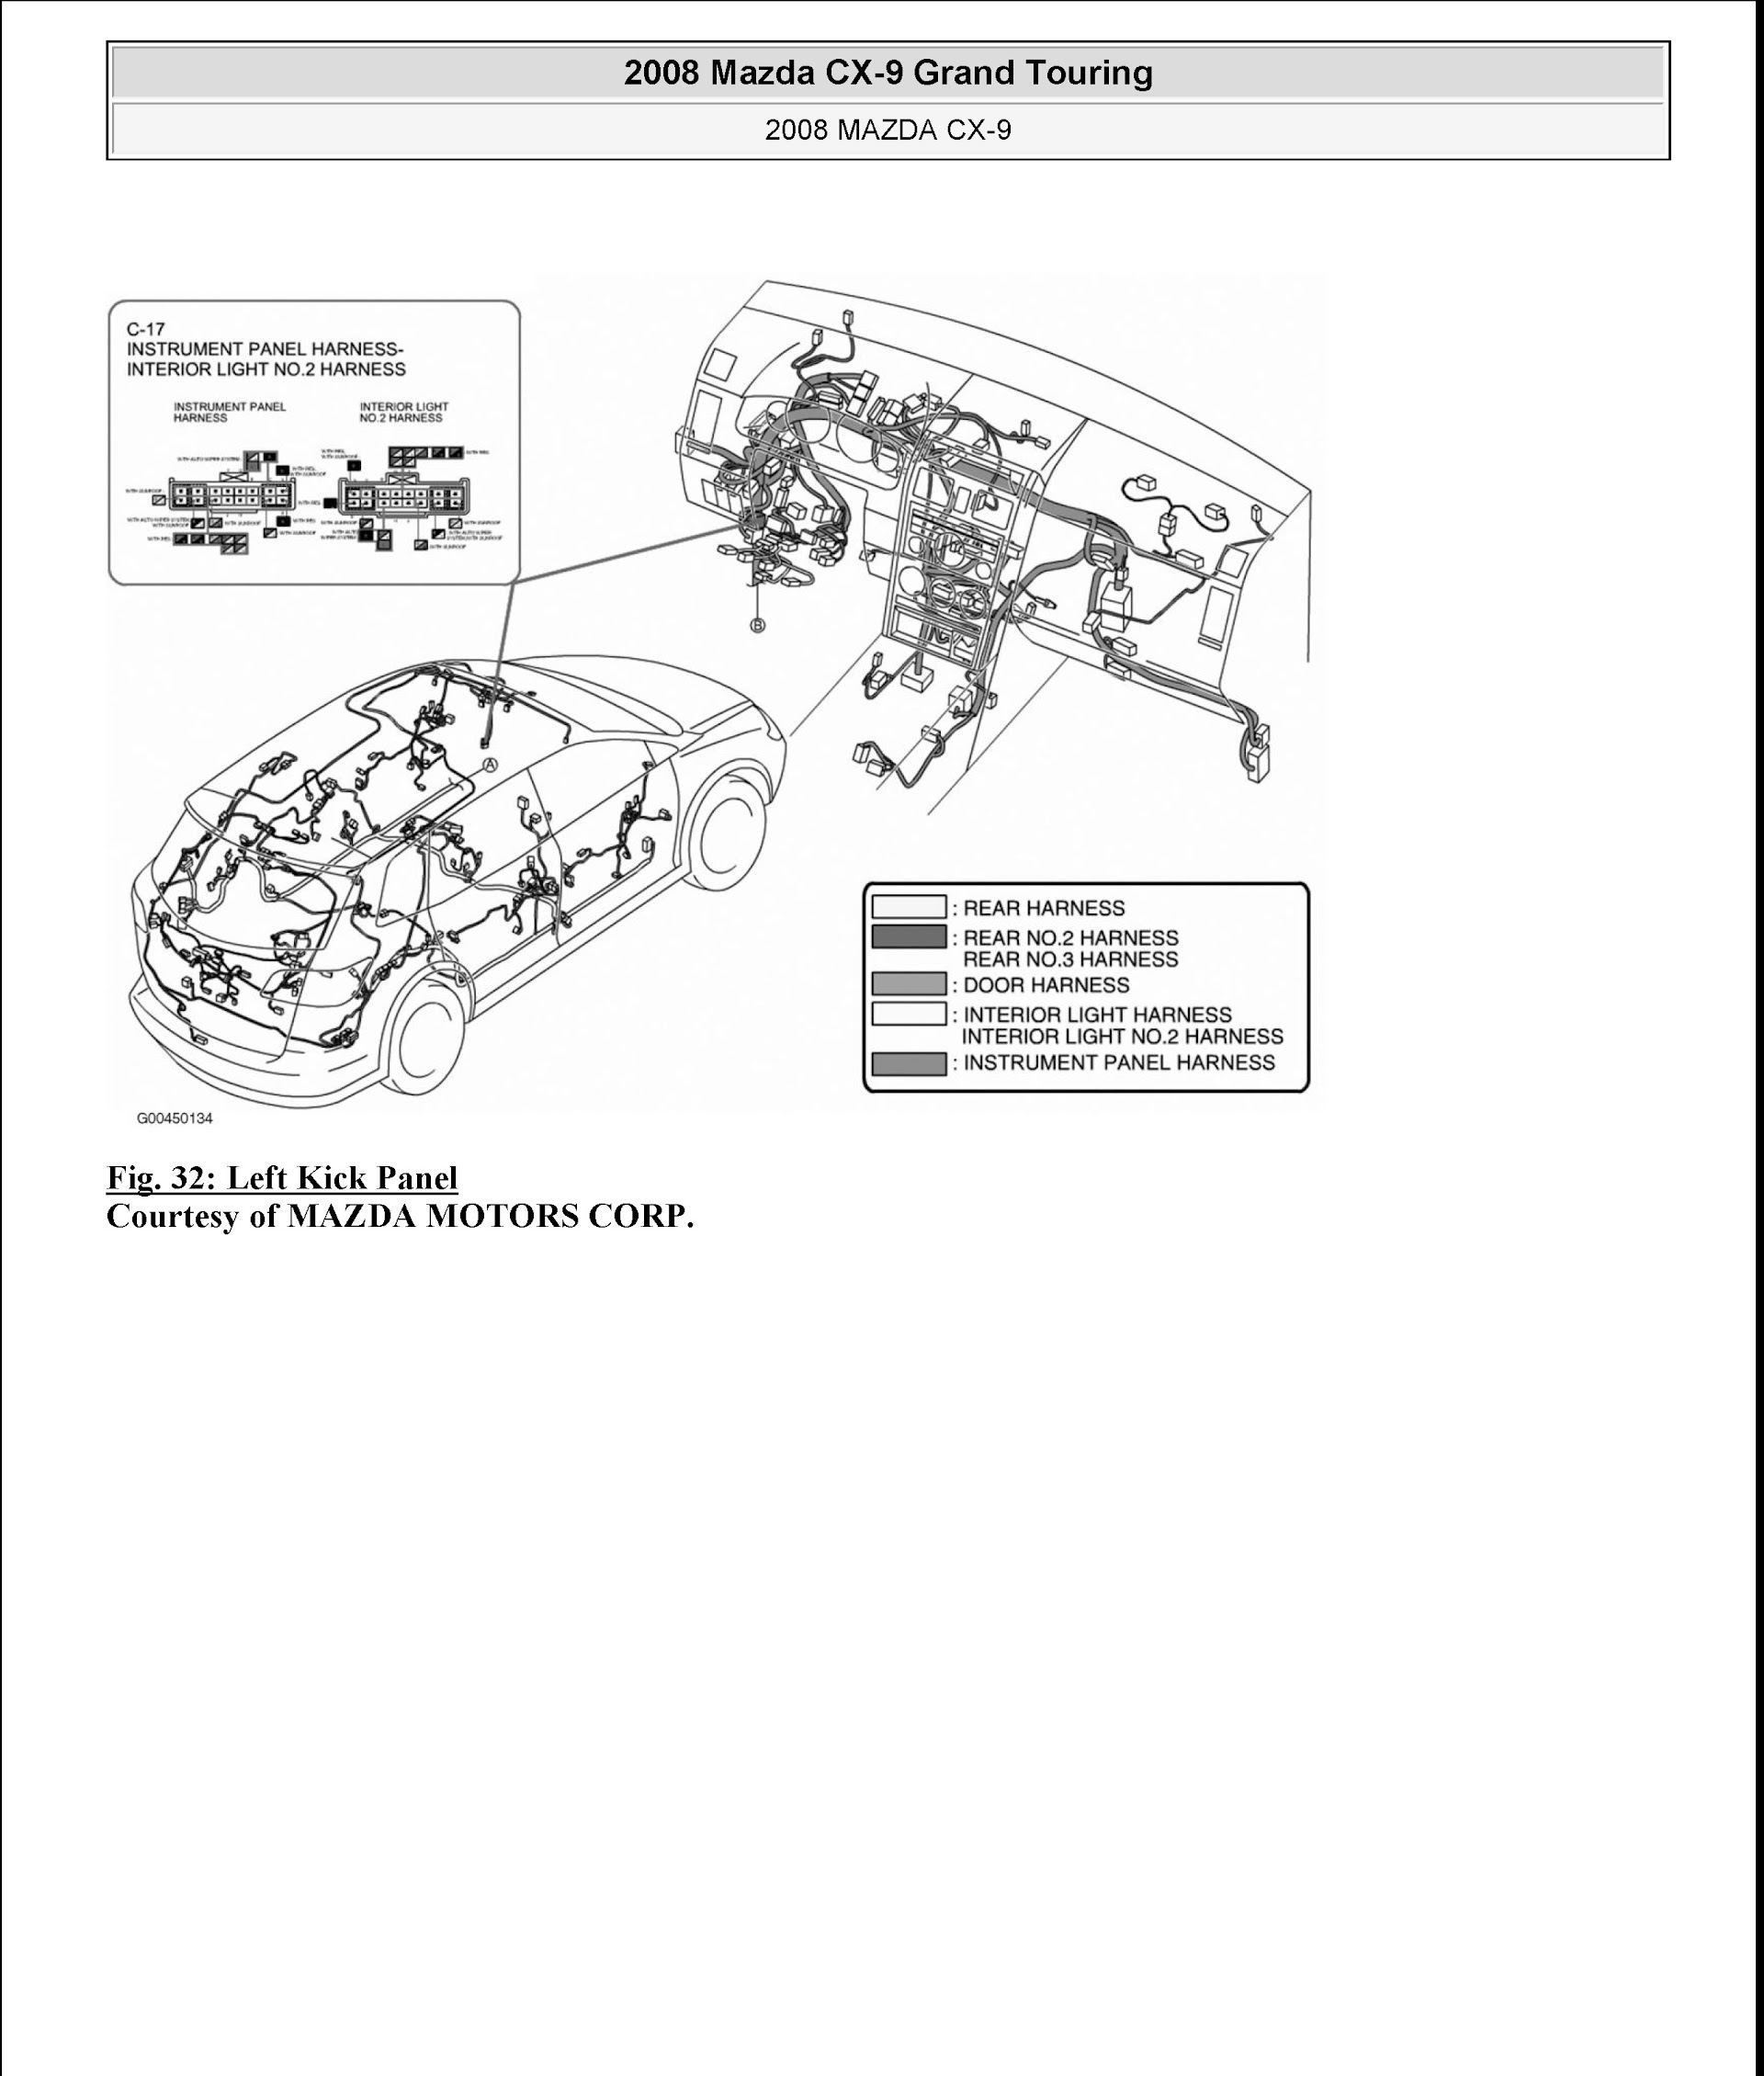 2008 Mazda Cx-9 Repair Manual &Quot;Grand Touring&Quot;, Wiring System